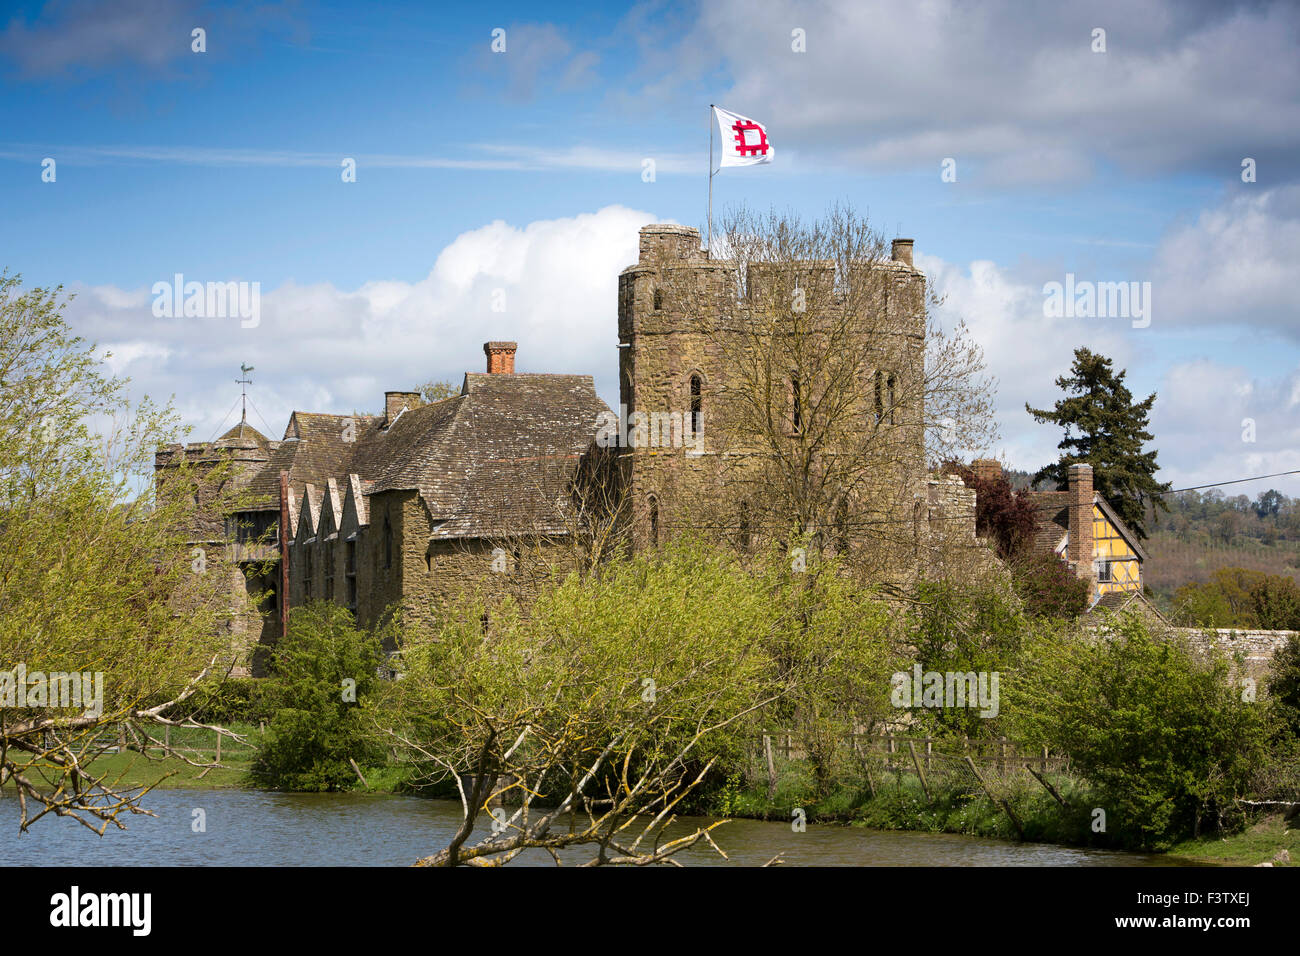 UK, England, Shropshire, Craven Arms, Stokesay Castle from across the lake Stock Photo